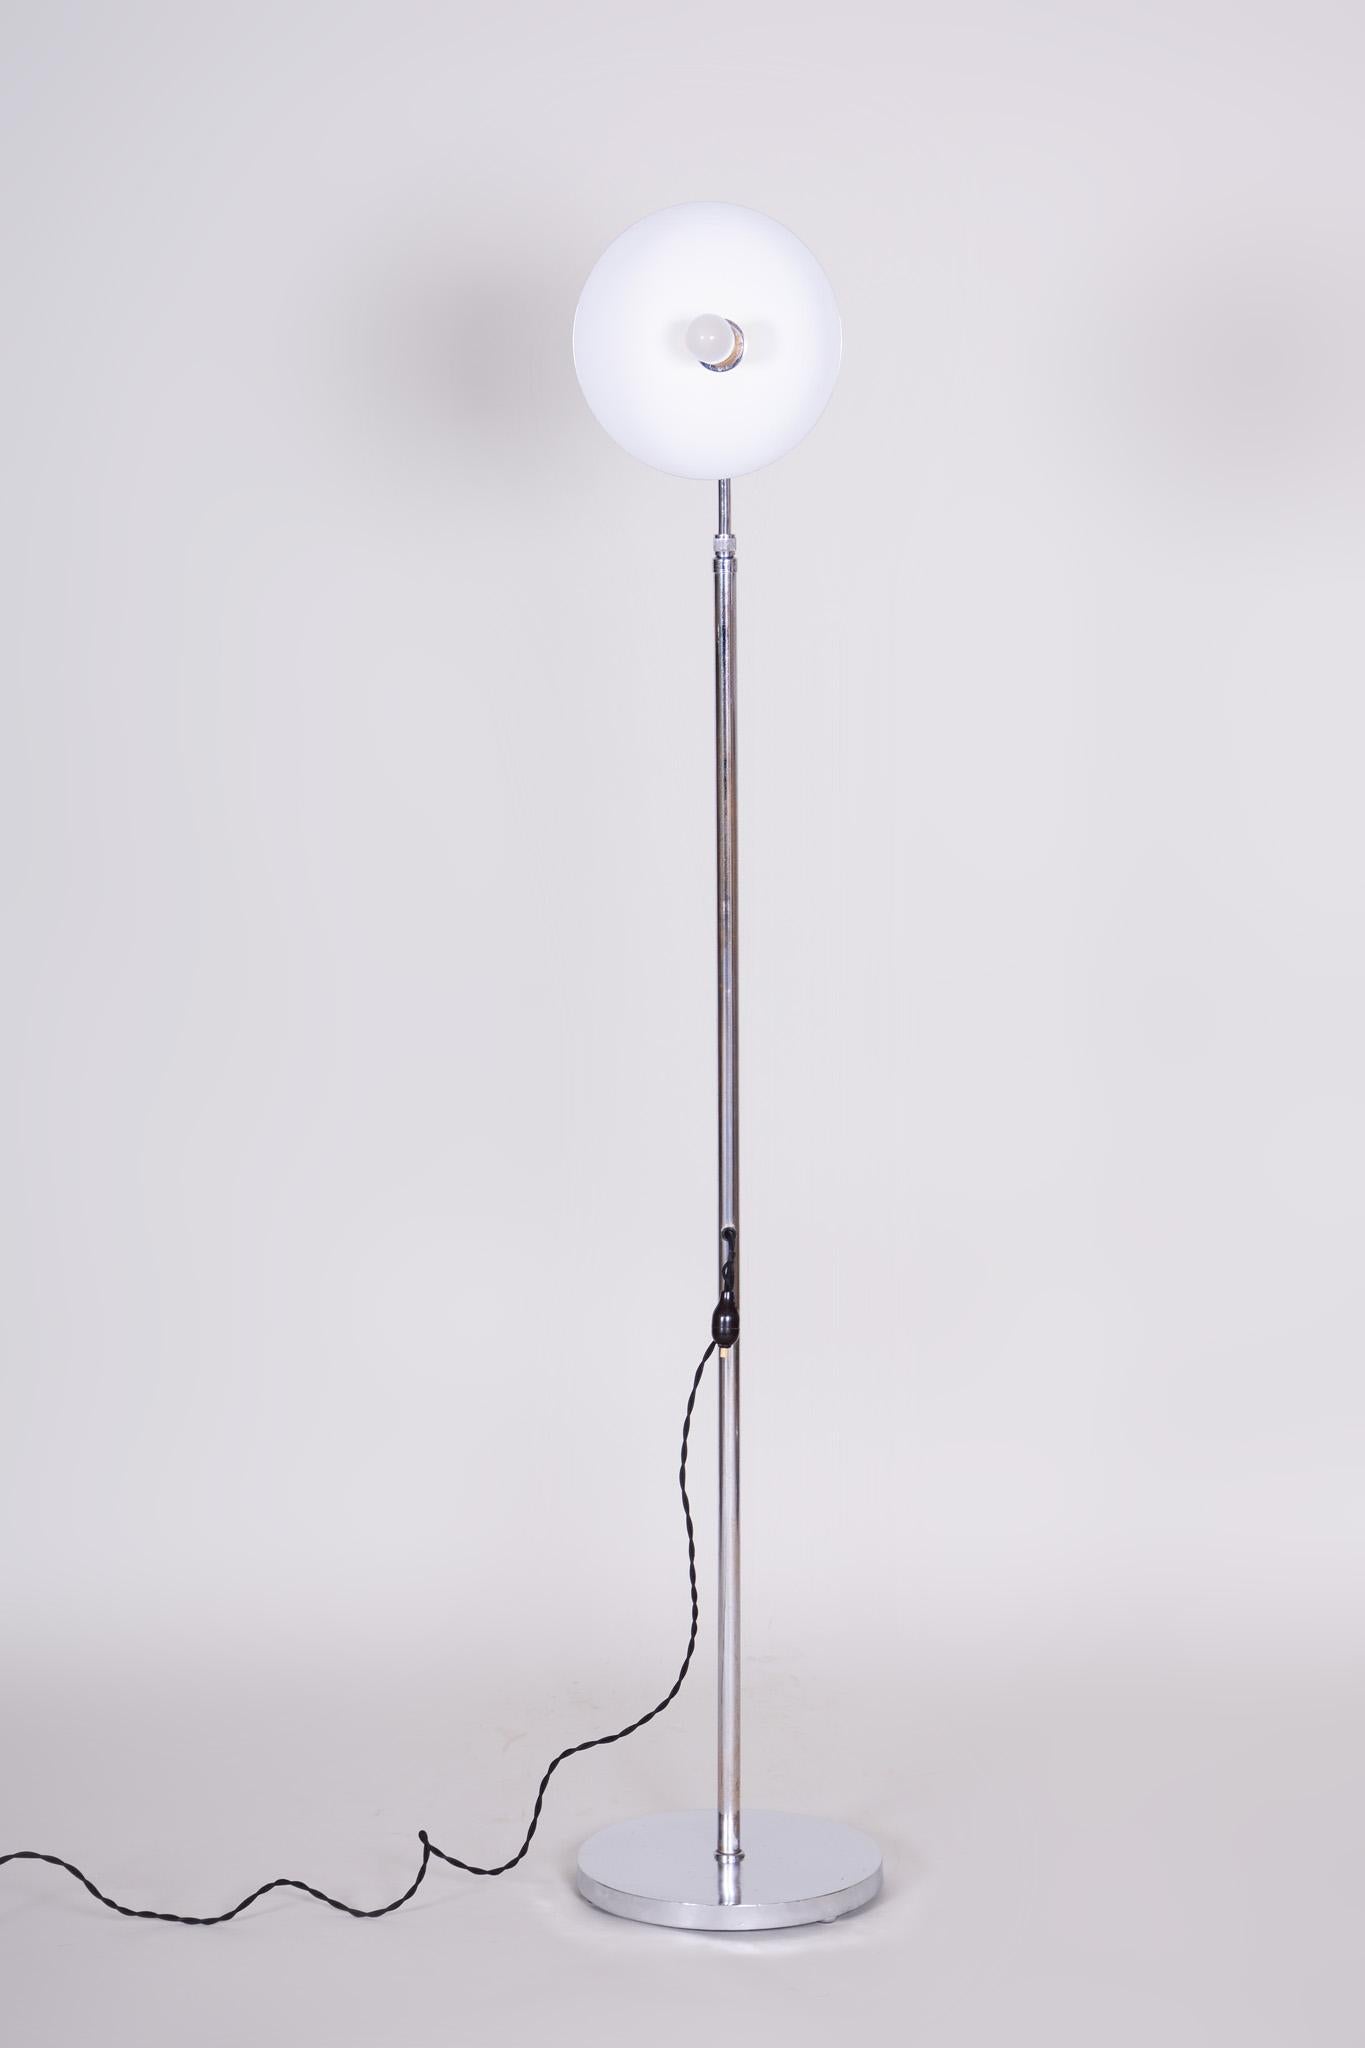 Restored Bauhaus Floor Lamp Made in the 1930s, Made Out of Chrome Plated Steel For Sale 9